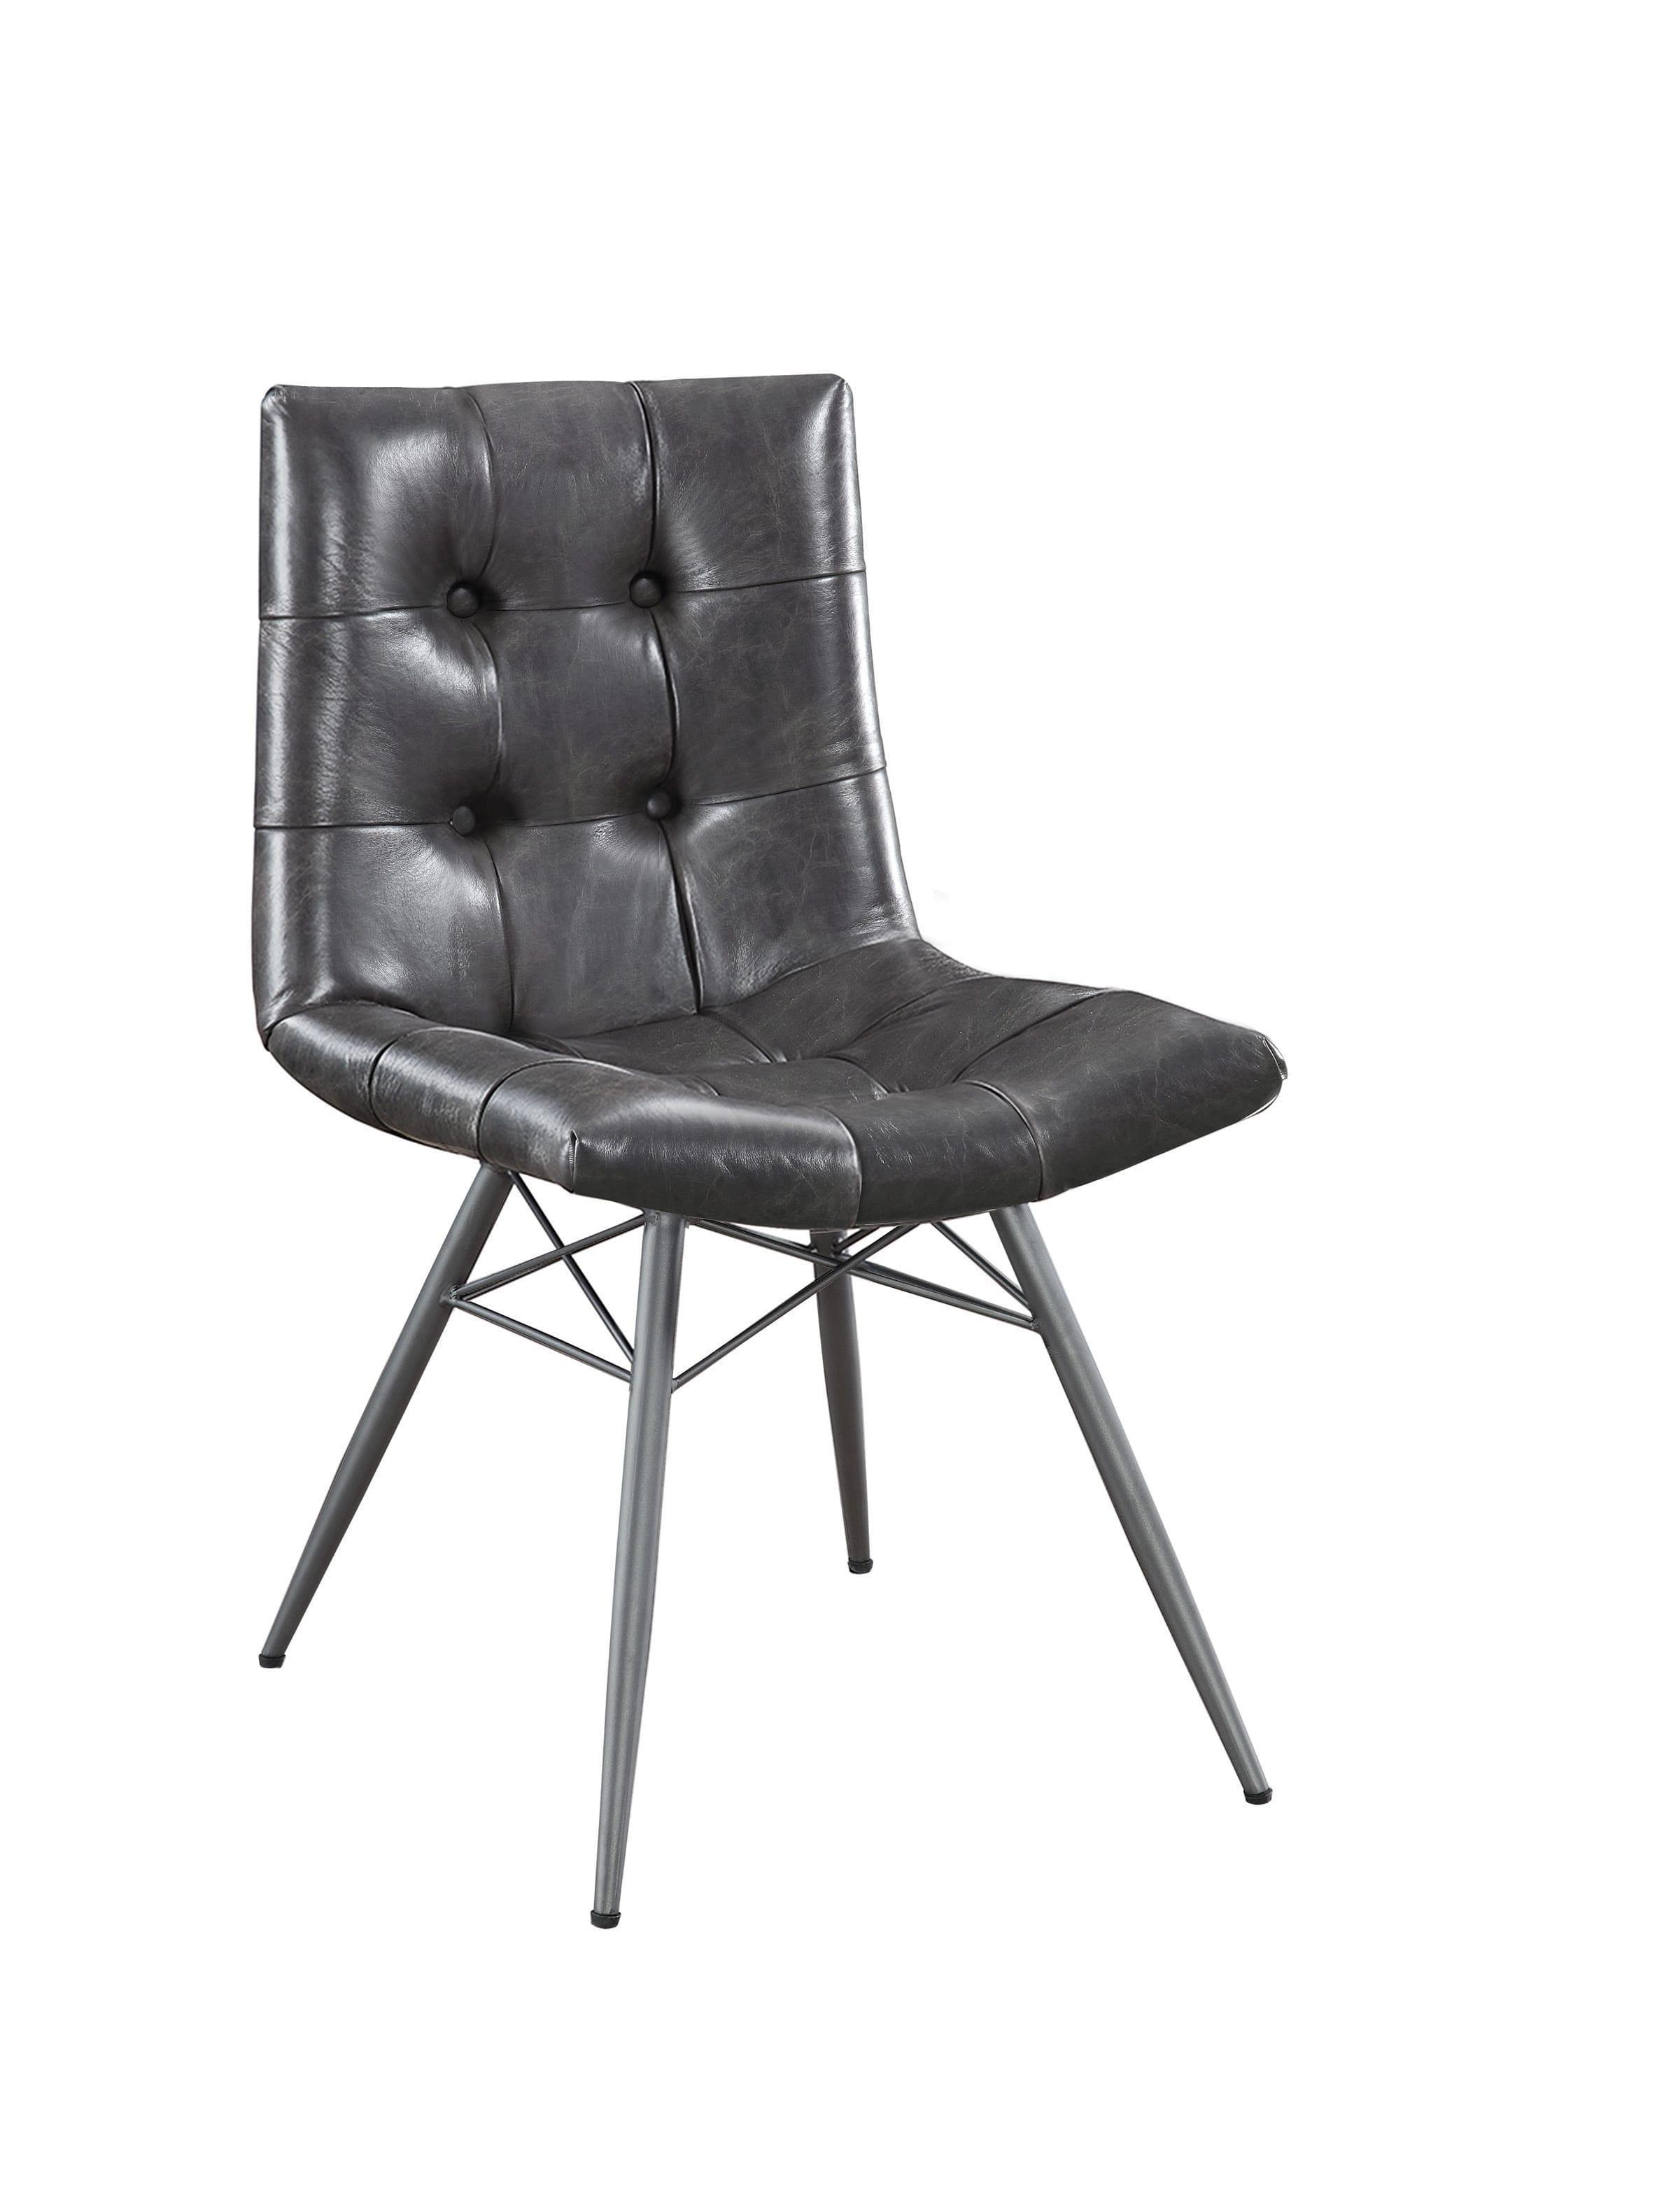 Modern Dining Chair Jamestown 107852 in Gray Faux Leather